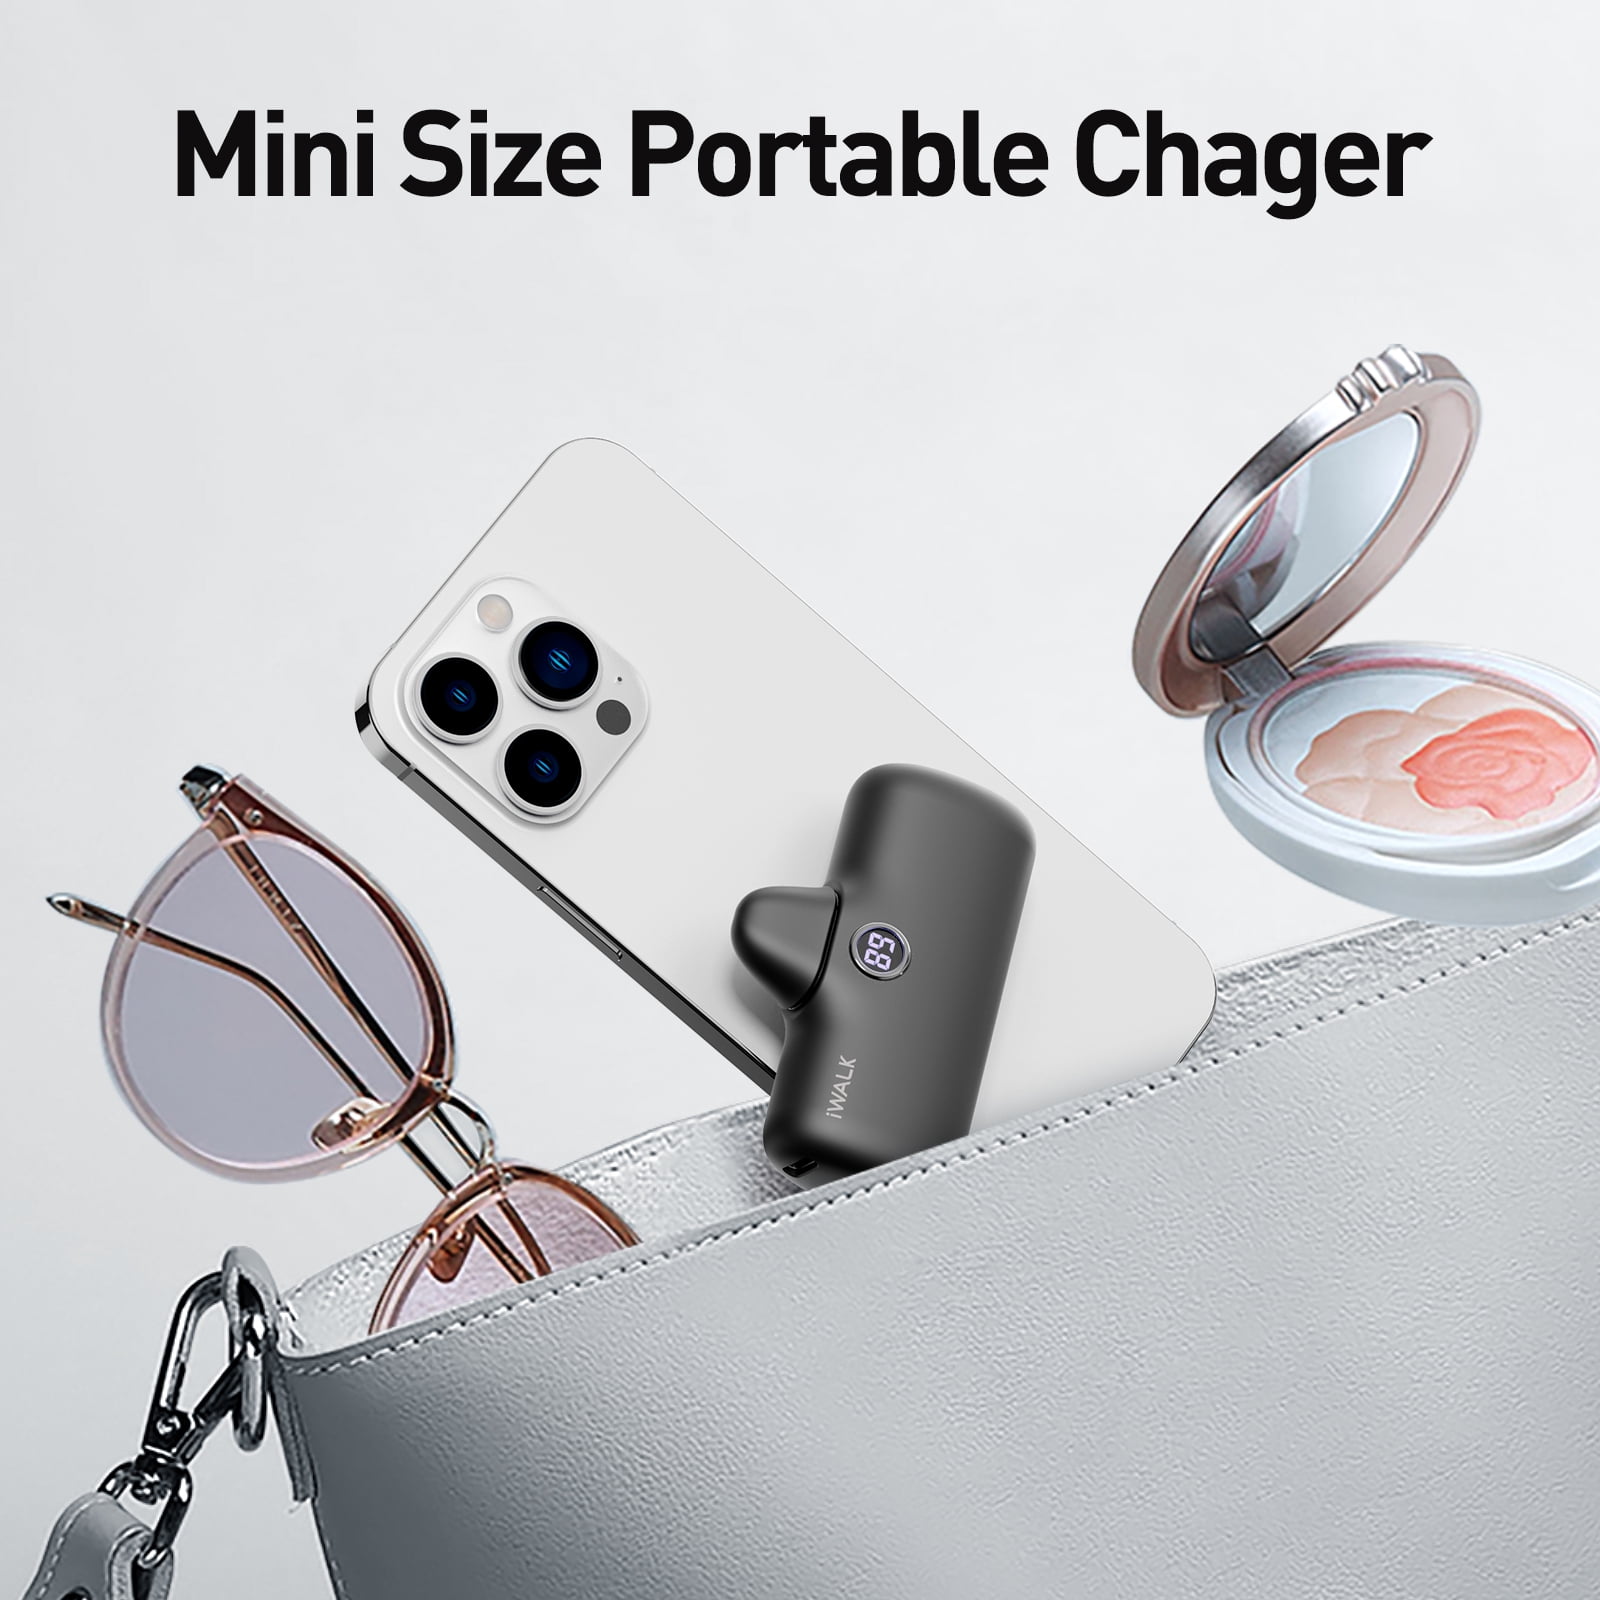 iWALK Portable Charger 4800mAh Power Bank Fast Charging and PD Input Small  - White £24.98 - Free Delivery